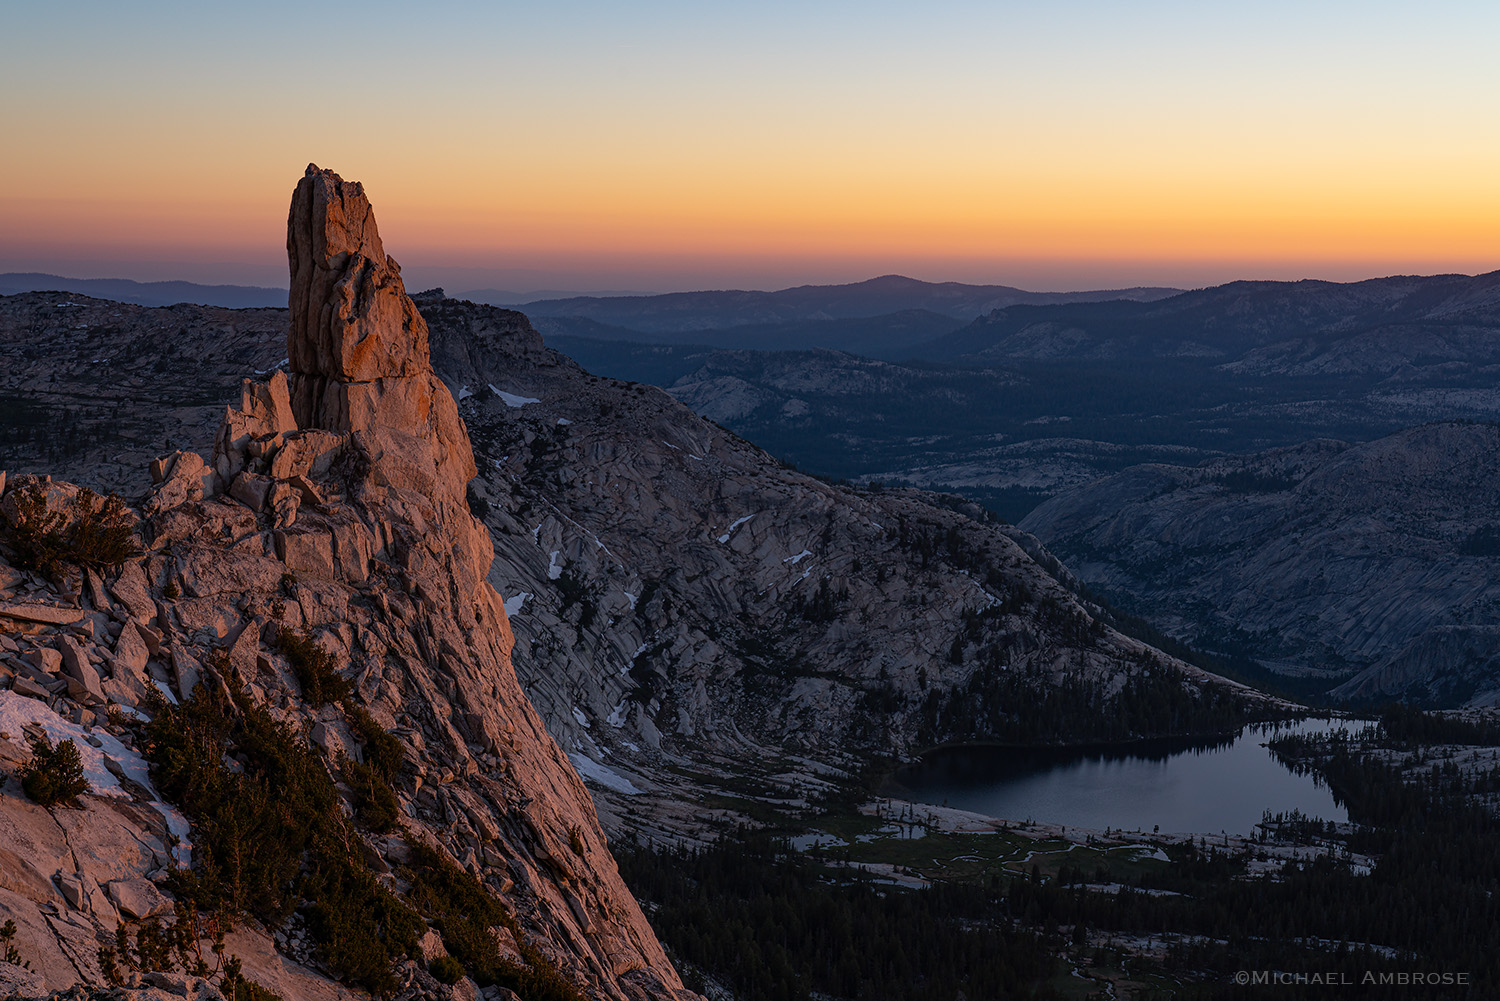 The Eichorn Pinnacle of Cathedral Peak in Yosemite National Park glows at sunset.